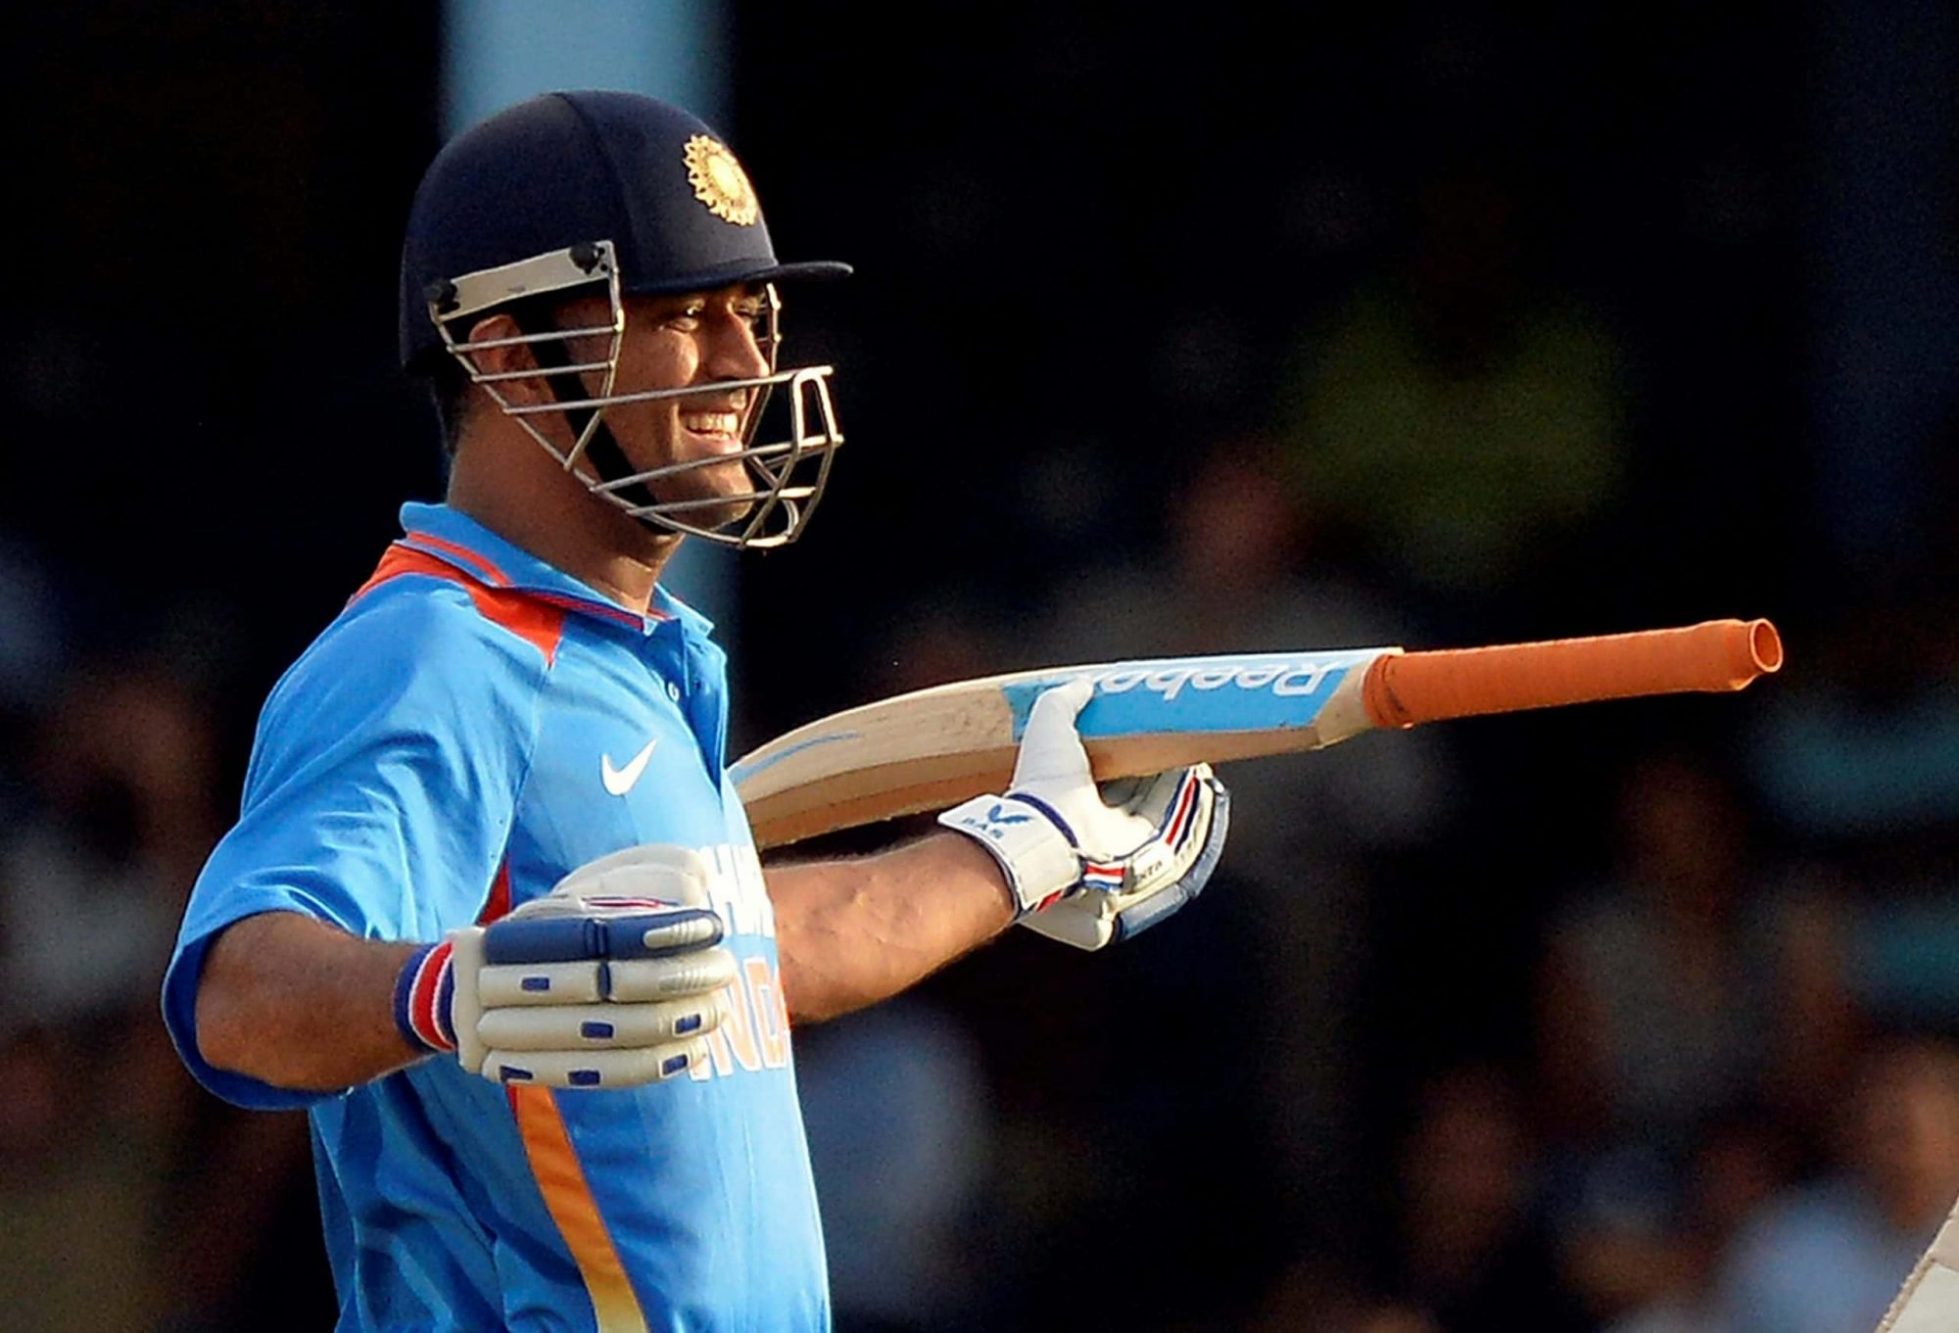 MS Dhoni's Epic Reply To A Twitter User Who Asked Him "To Concentrate On Batting" Is Getting Viral - Details Here Former India skipper Mahendra SIngh Dhoni is well-known for his witty responses and funny oneliners. Dhoni’s witty comments were caught several times from the stump mic. In India, former India captain MS Dhoni is worshipped like legendary Sachin Tendulkar as he enjoys a god-like status in the country. However, MS Dhoni now stays away from the digital platforms and doesn't interact with his fans. Chennai Super Kings captain lives a private life when he is away from the game and enjoy spending time with family. The Ranchi-lad, who stays away from the limelight, is followed by 33.1 m people on Instagram and 8.2 million people on Twitter. Dhoni used to be quite active on social media 7-8 years back and sometimes also replied to the fans. A few years back, Dhoni had also trolled Ravindra Jadeja, the veteran all-rounders of team India in series of tweets, which led to him earning the 'Sir' tag. Jadeja is now popularly referred to as 'Sir Jadeja'. Meanwhile, in an eye catching incident, back in 2012, Dhoni had responded to a user who had asked him to concentrate on his batting and not Twitter. However, MSD came up with a hilarious response. He wrote: “Sir yes sir, any tips sir.”. The epic tweet has so far been retweeted by over 2,500 times and is now again getting viral on social media platforms. Check Tweets Here – https://twitter.com/msdhoni/status/225143226426859520?s=19 https://twitter.com/msdhoni/status/225144124242788352?s=19 Here it is to be noted that, MS Dhoni is not regular in either of the two platforms – Twitter and Instagram. His last post on both the social media services came in January 2021. The former India captain will make his comeback to competitive cricket in September as the BCCI has confirmed staging the remainder of IPL 2021 in UAE. Dhoni-led Chennai Super Kings were placed at the 2nd spot before the season was suspended due bio-bubble breach. CSK won 5 out of 7 league stage matches. Meanwhile, Dhoni’s fans are eagerly waiting for the resumption of Indian Premier League (IPL) 2021 in September after the BCCI has confirmed staging the remainder of the fourteenth season of the cash-rich league in the United Arab Emirates (UAE). Back in 2012, MS Dhoni had hilariously trolled a Twitter user who asked him to concentrate on his batting rather than being active on Twitter. Dhoni stays away from social media now.